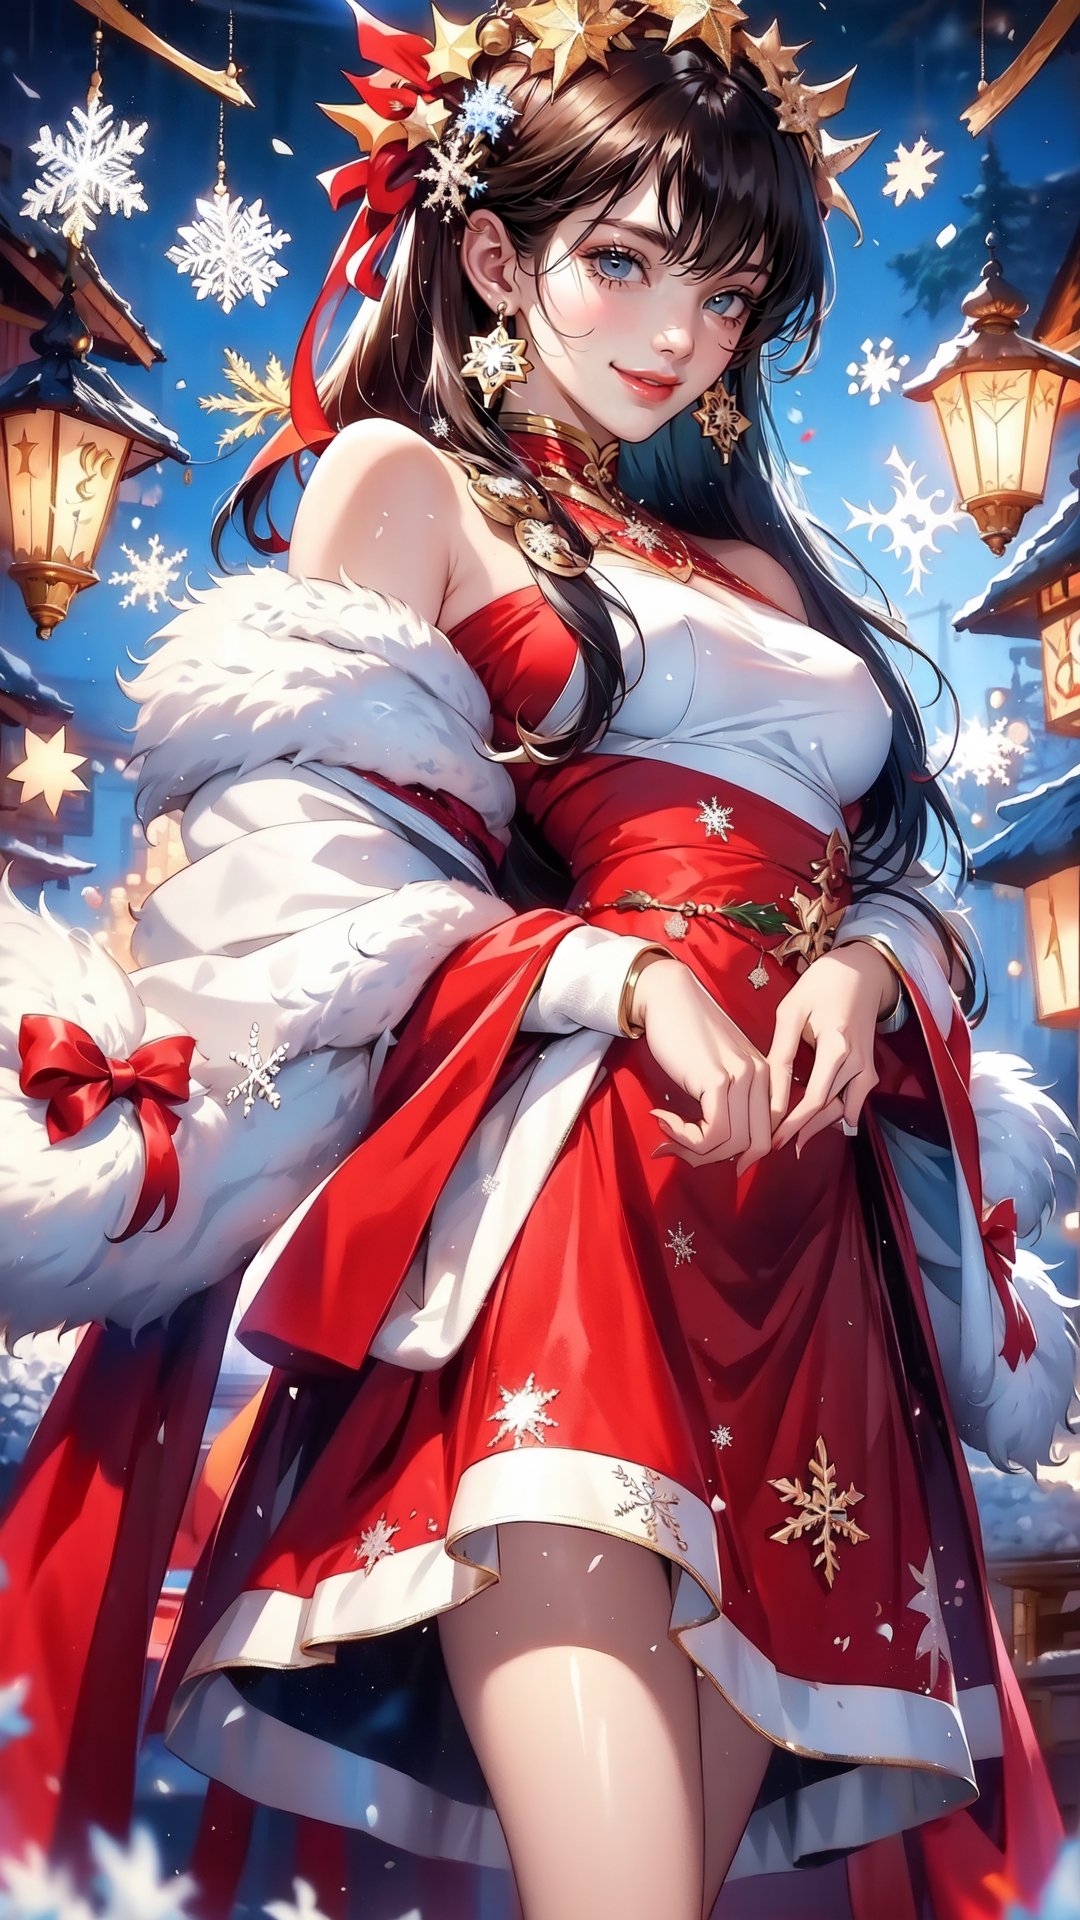 A little match seller in a Christmas costume surrounded by beautiful snowflakes,Snowflake,young girl